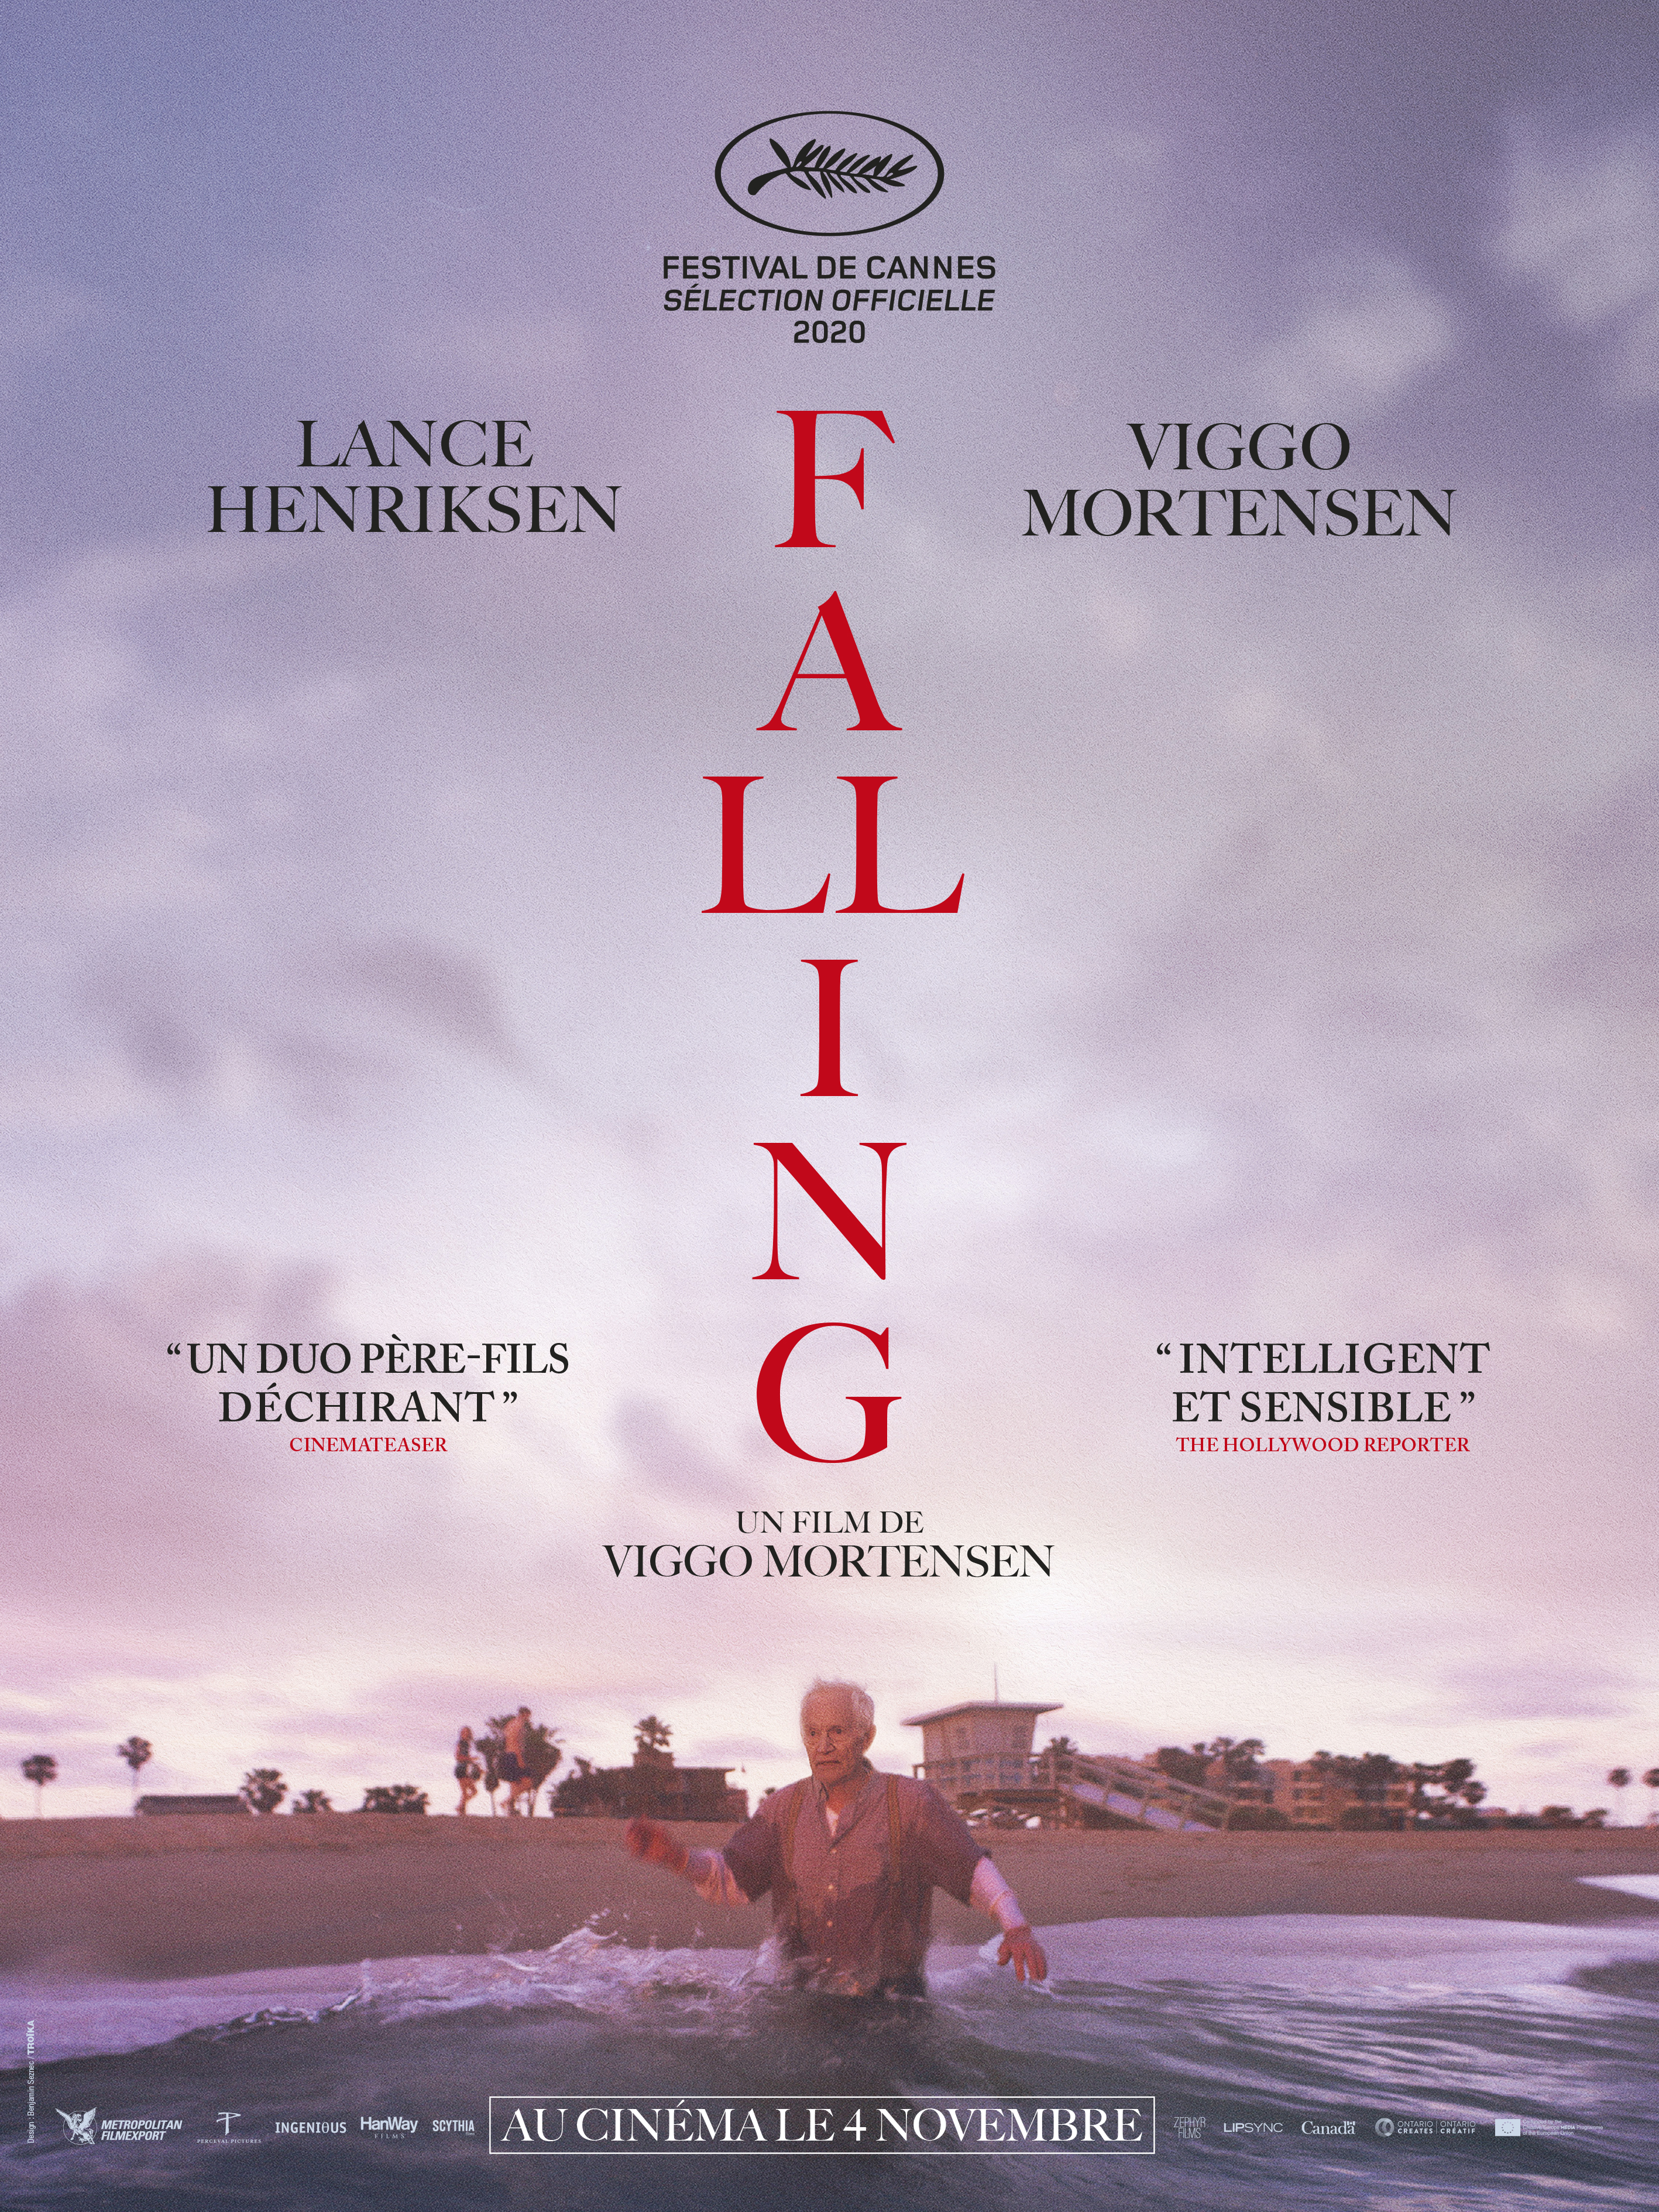 poster for falling with an old man waist deep in the sea in a shirt and trousers